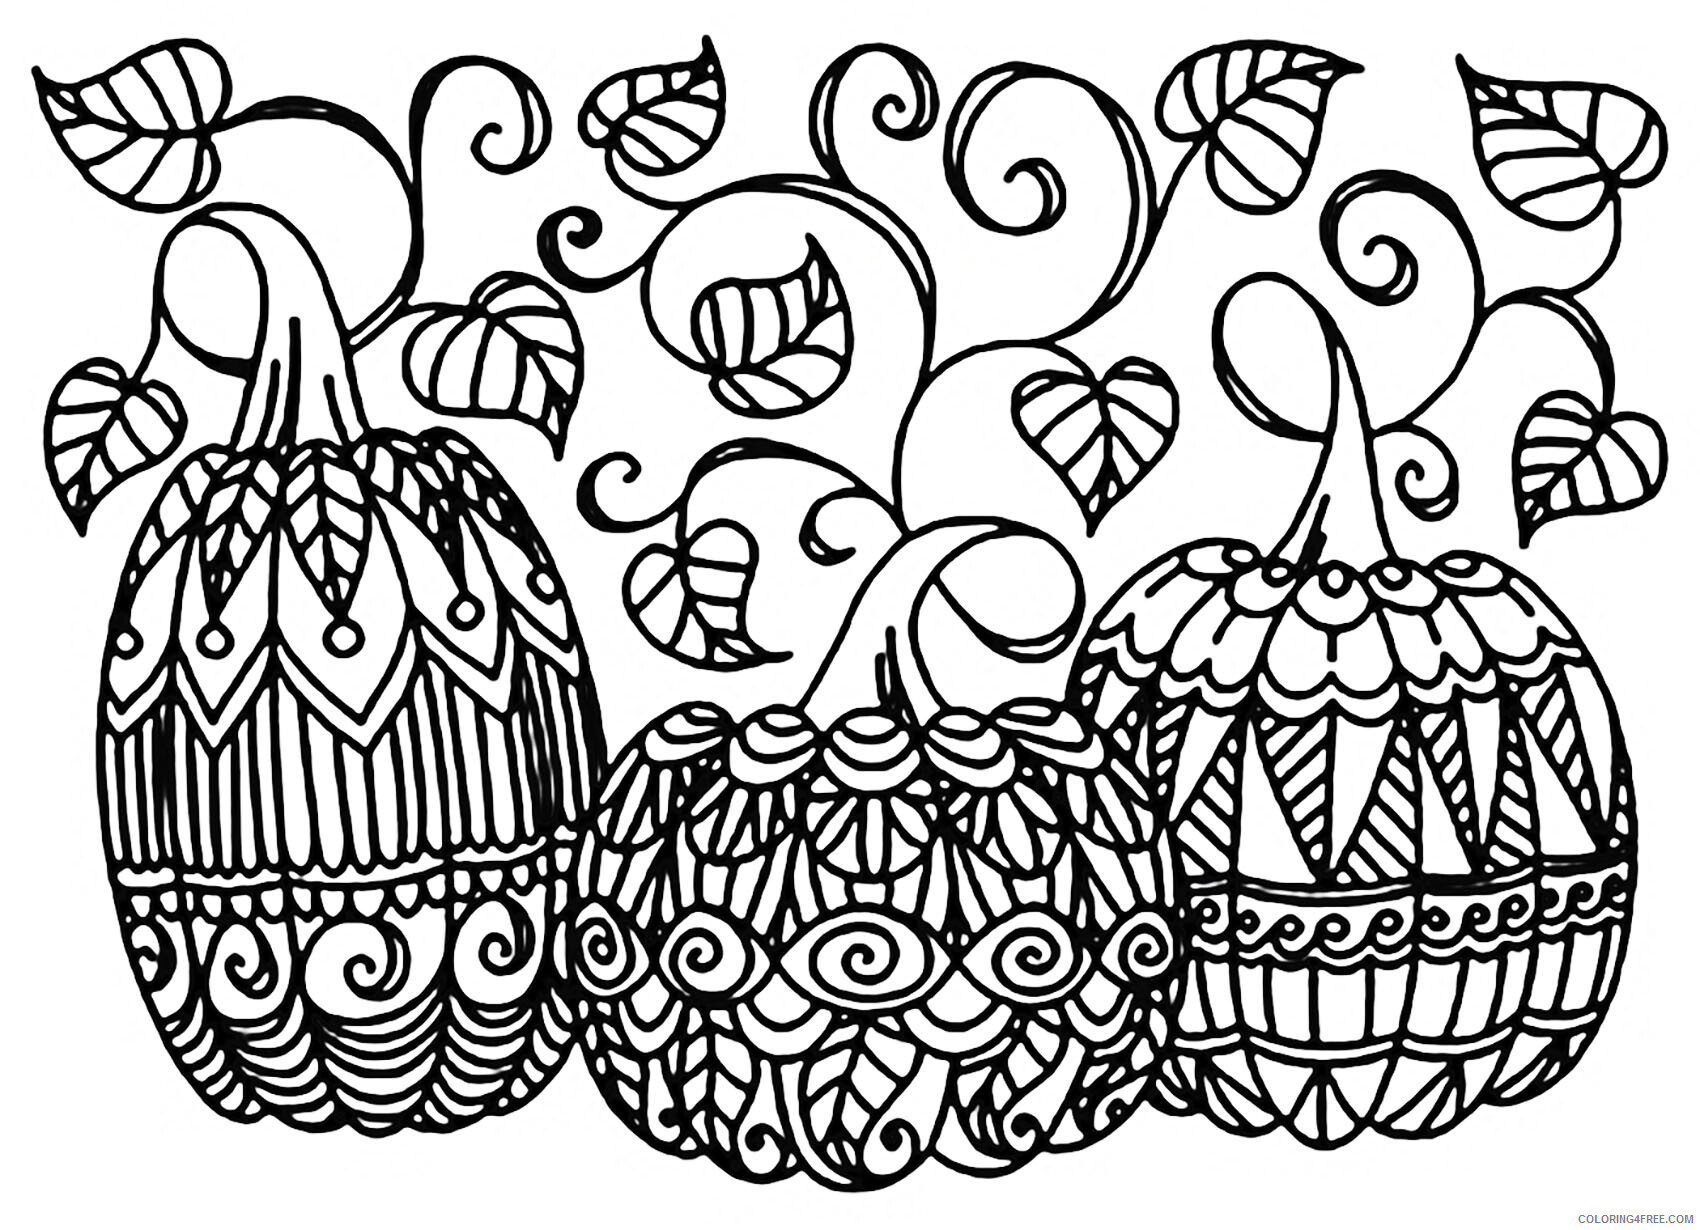 Pumpkin Coloring Pages Vegetables Food Three Pumpkins for Adults 2021 734 Coloring4free